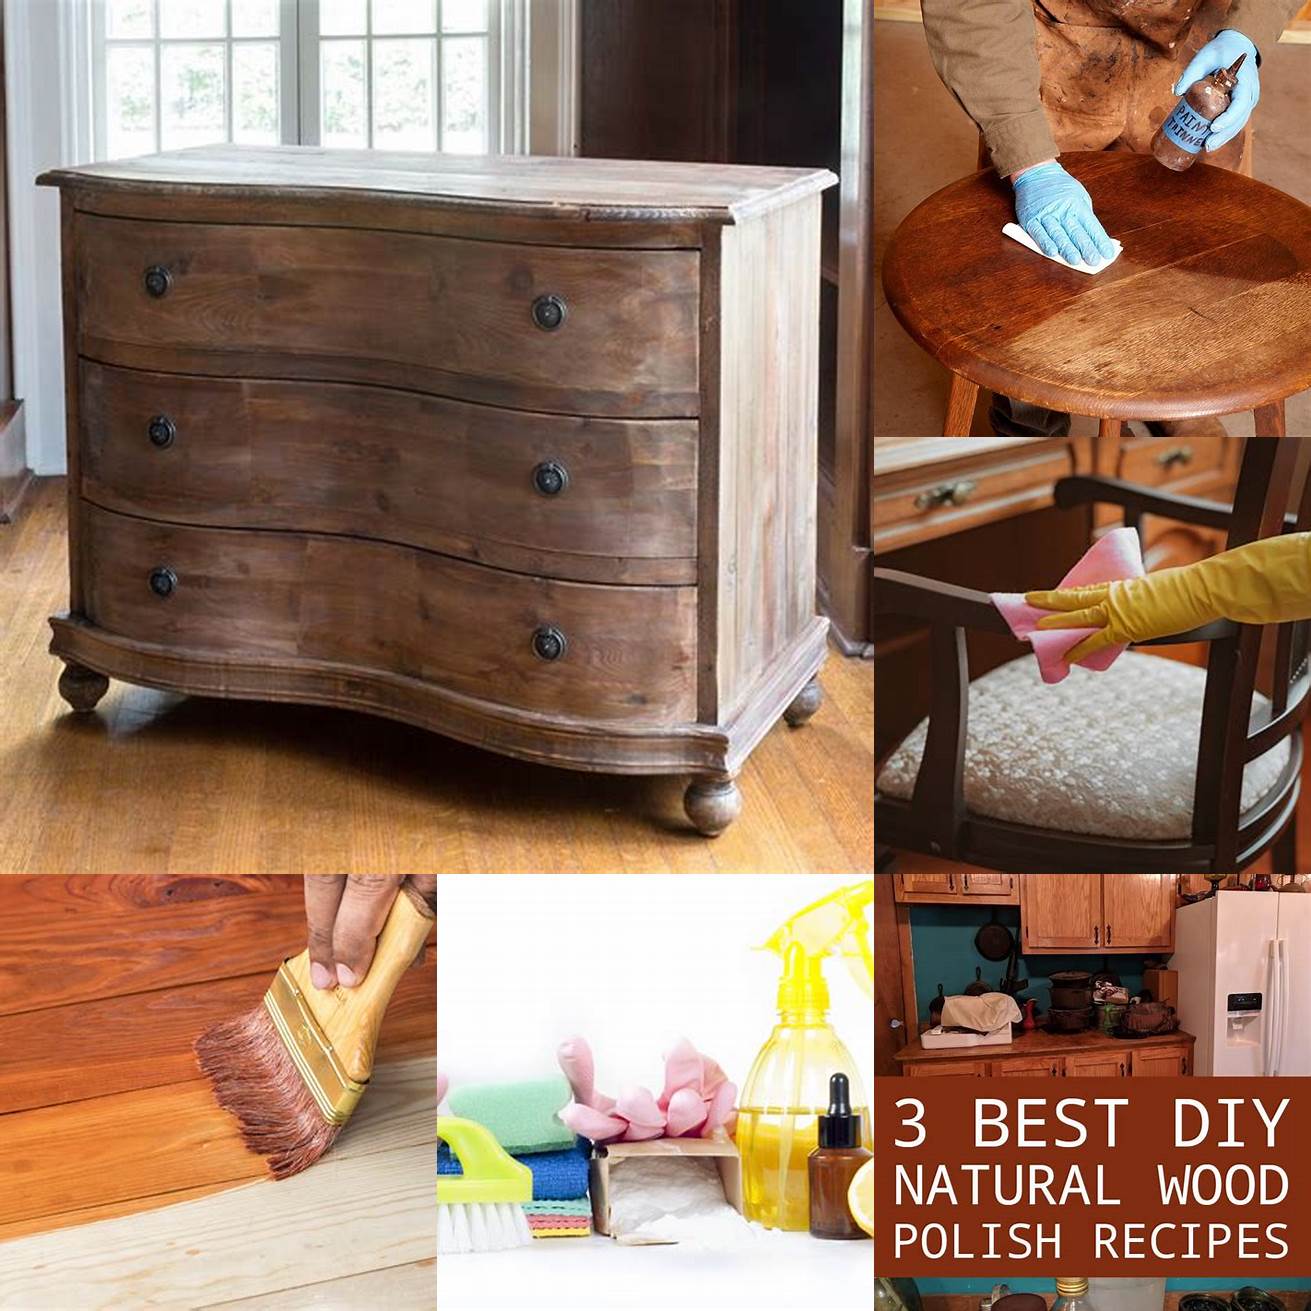 Avoid harsh chemicals Rustic furniture is often finished with natural oils or waxes which can be damaged by harsh chemicals Instead use a soft cloth and gentle soap and water to clean your furniture